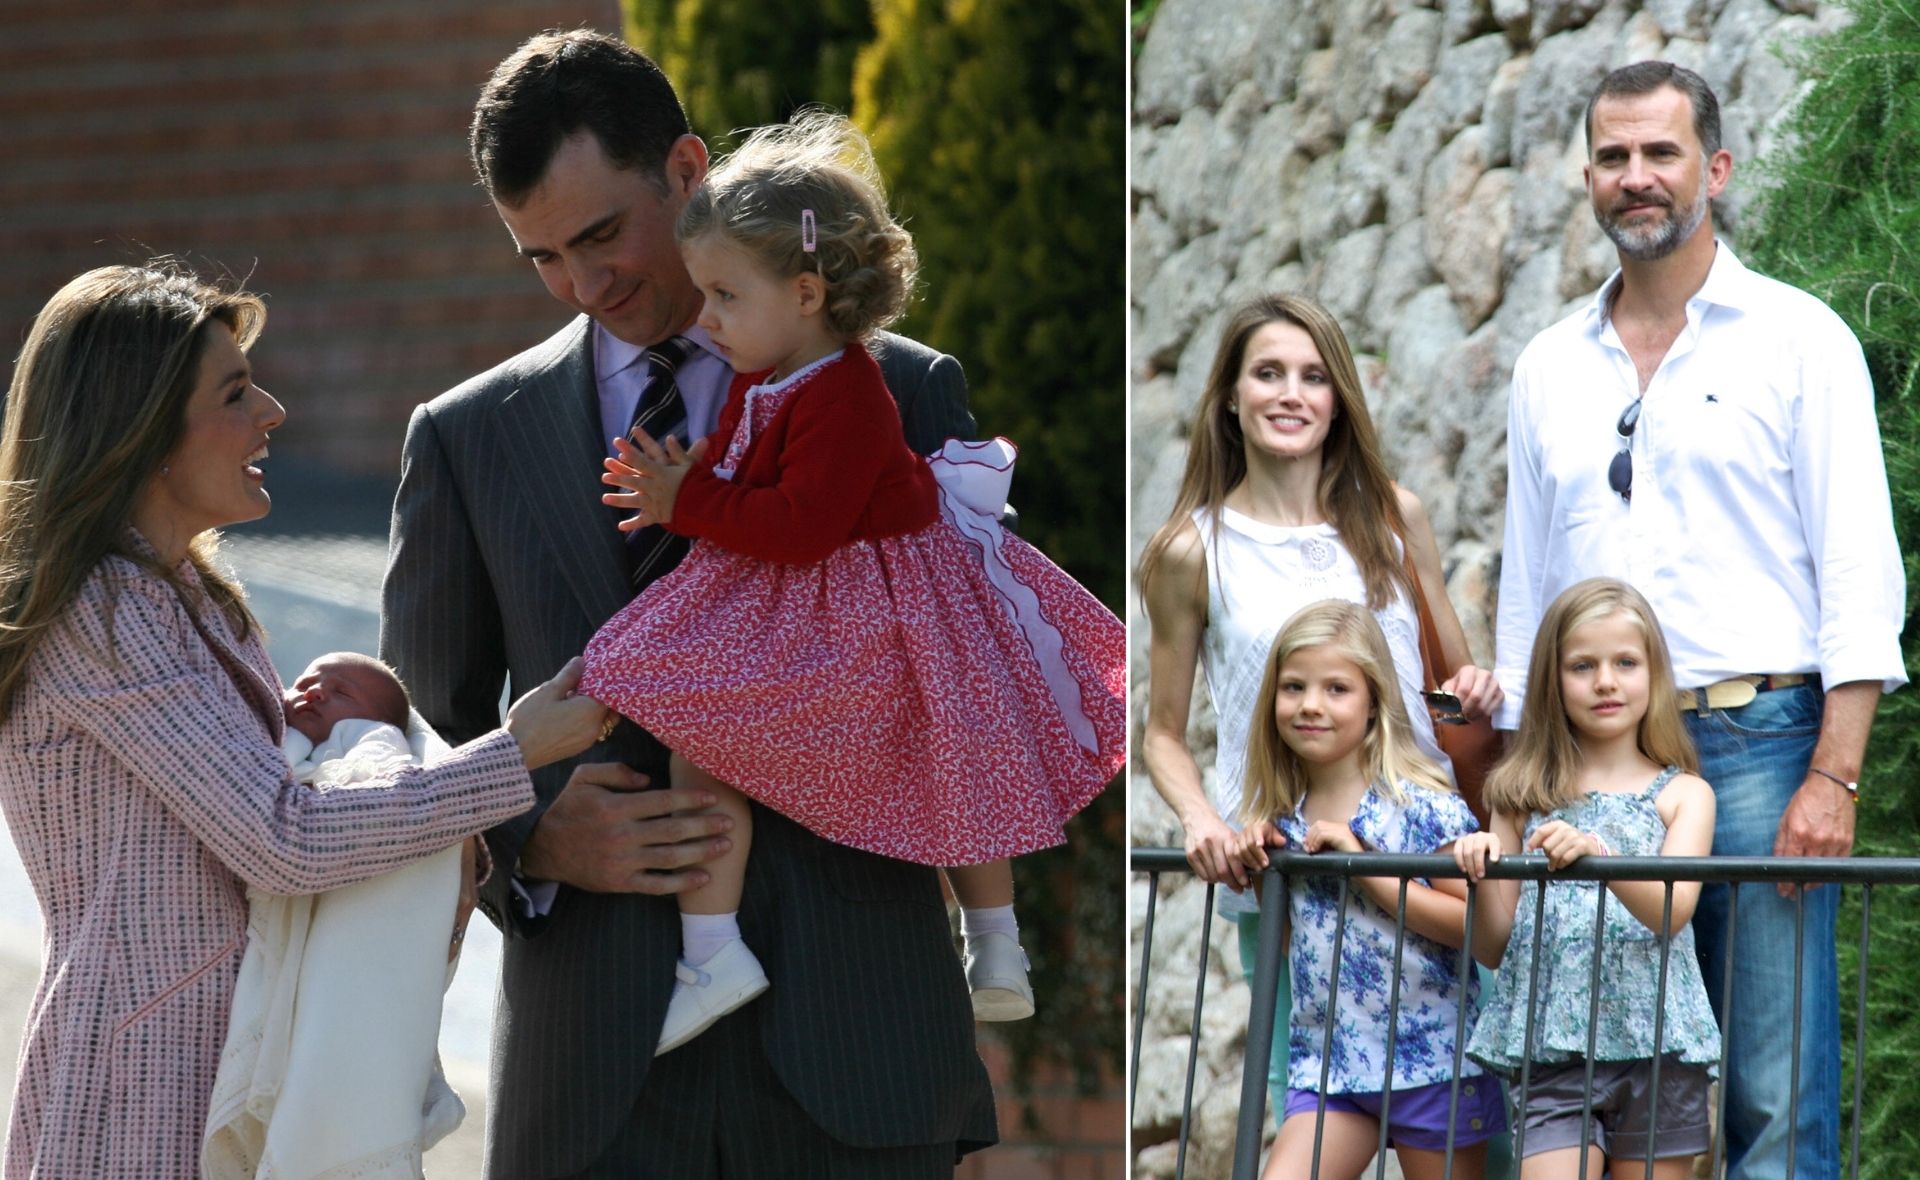 They take duty seriously, but Queen Letizia and Felipe VI of Spain cherish their two daughters above all